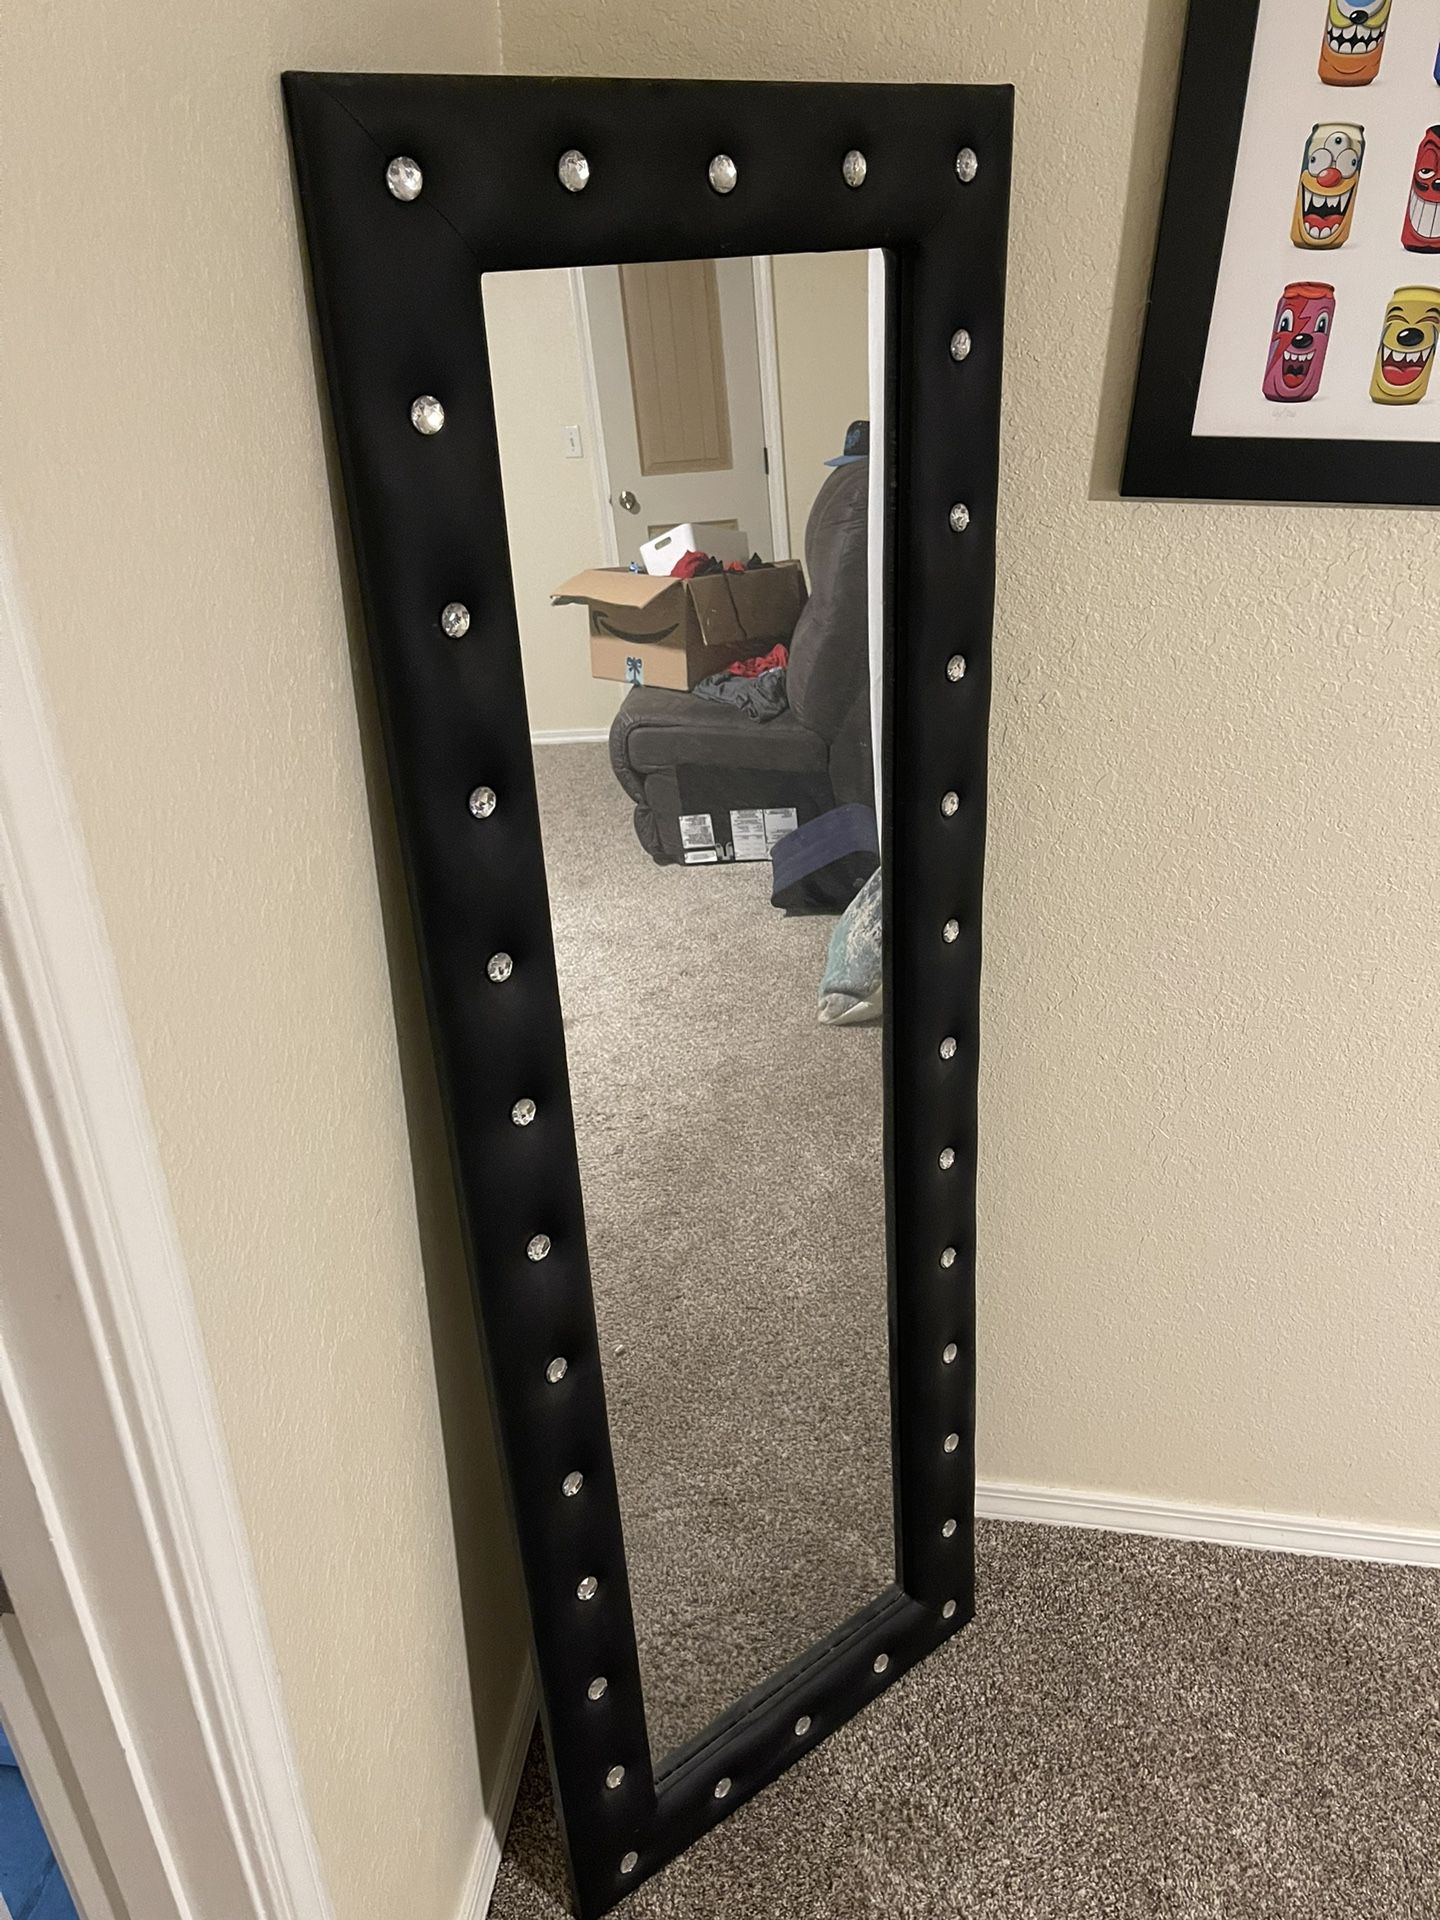 5 Foot Tall Leather Mirror 